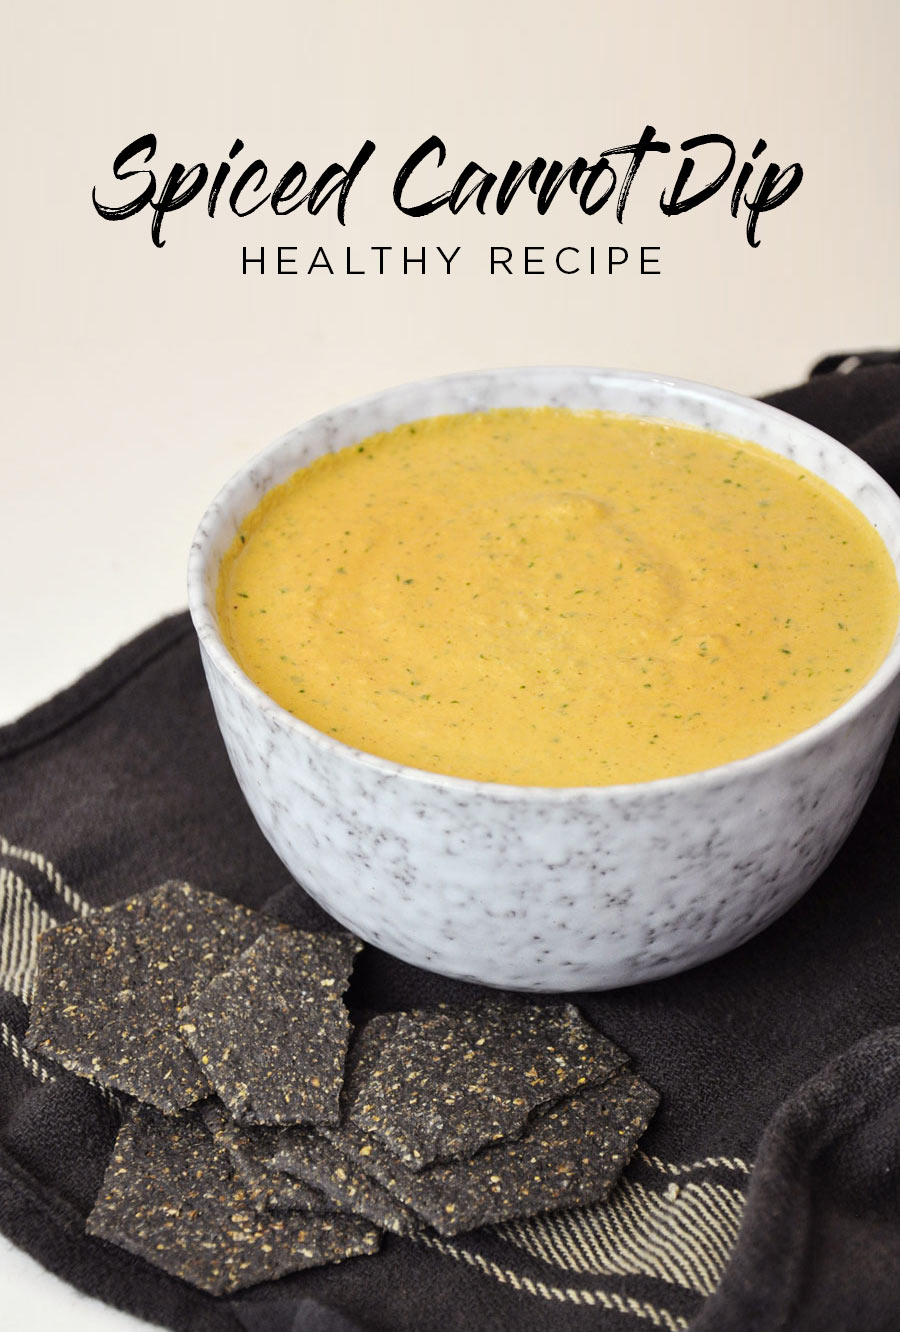 Spiced Carrot Dip Recipe with the Breville Boss from @visualheart